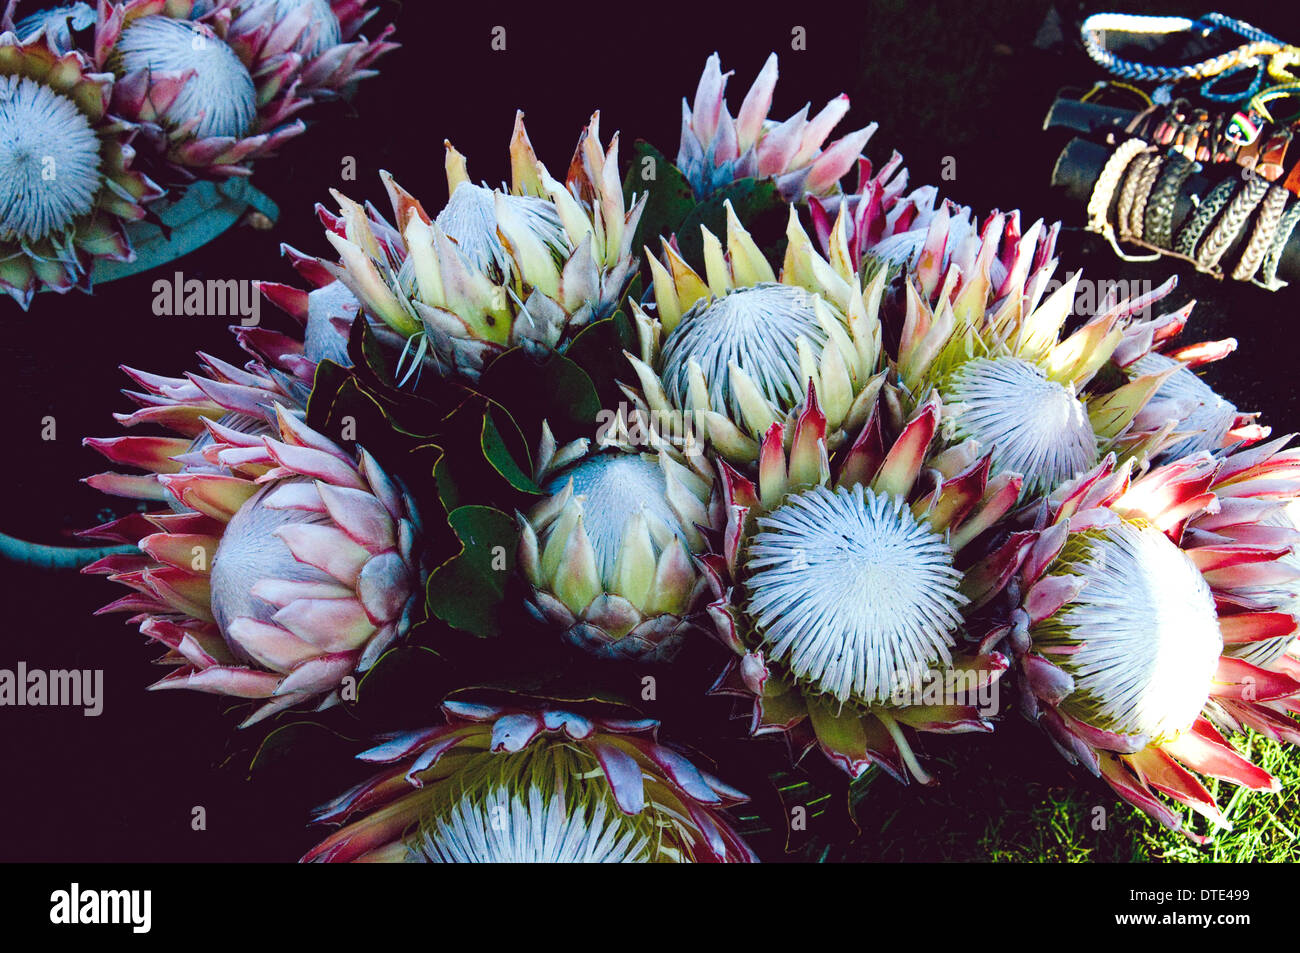 Proteas, South Africa's national flower, on sale in a jug in January (winter). The flowering season is around September. Stock Photo